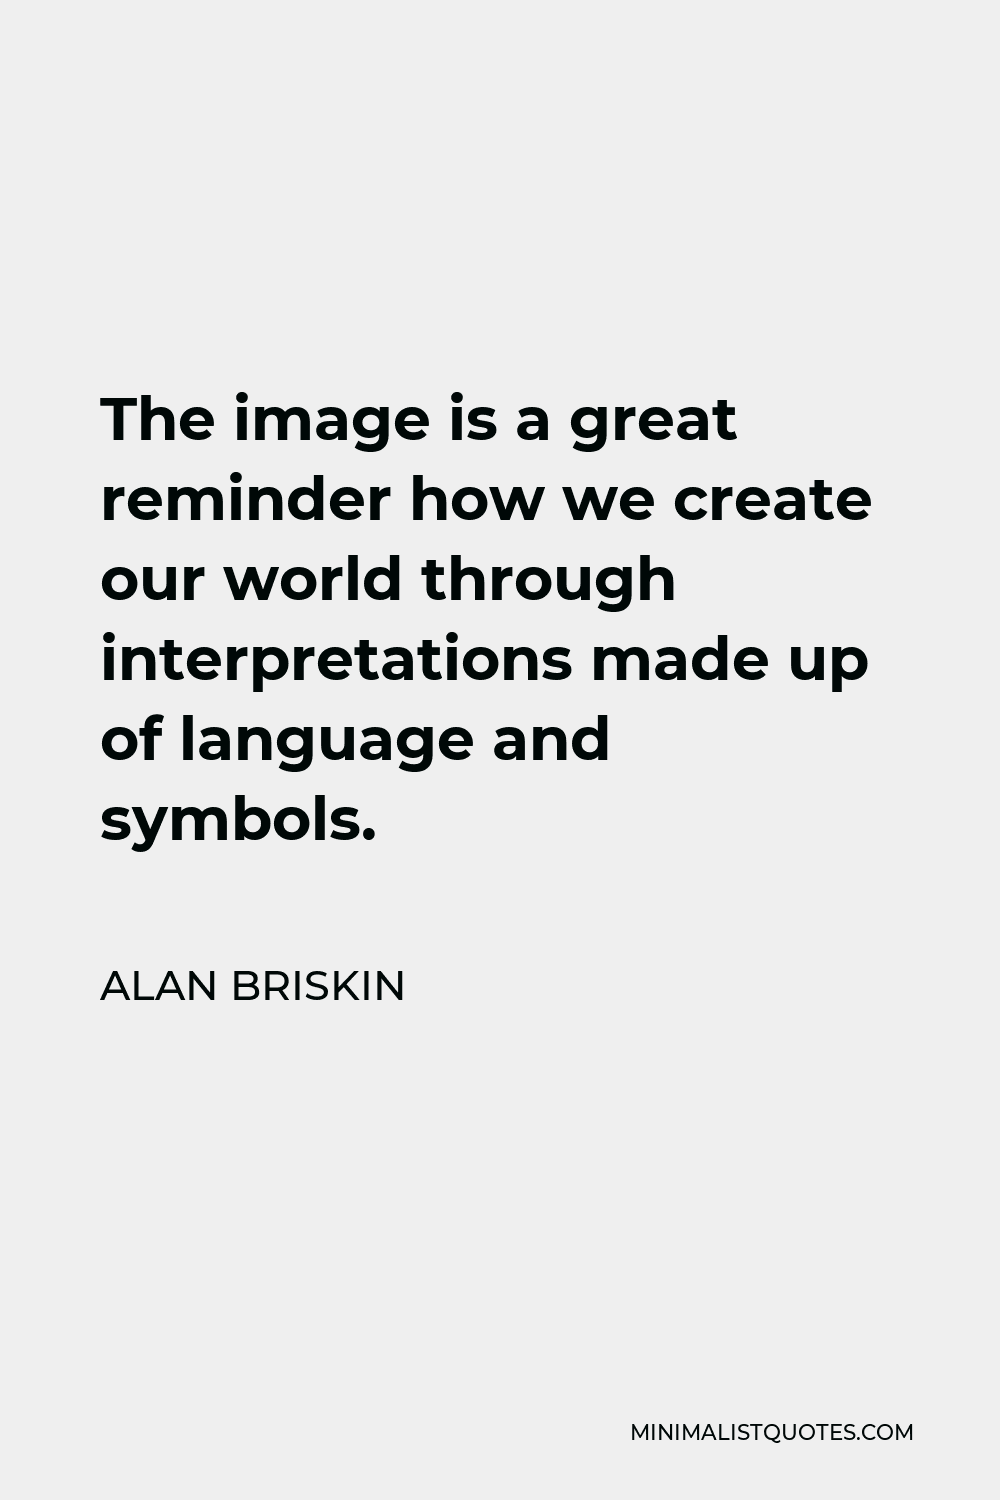 Alan Briskin Quote - The image is a great reminder how we create our world through interpretations made up of language and symbols.